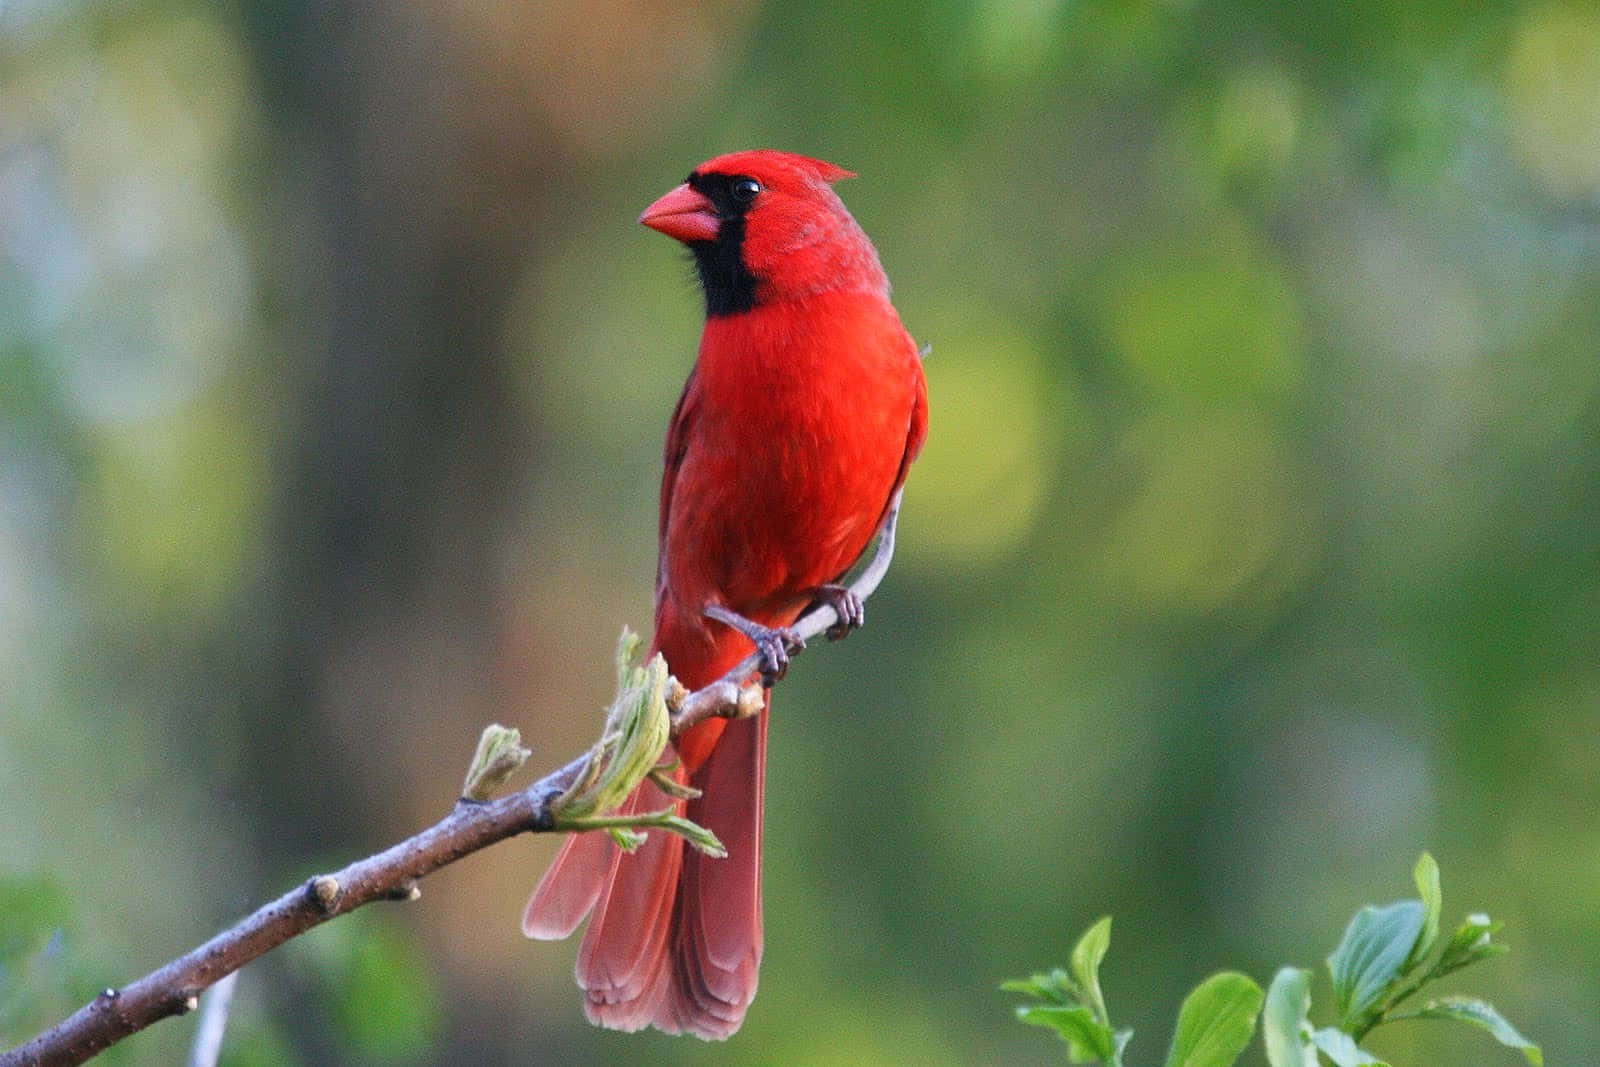 “A beautiful cardinal perched on a tree branch”